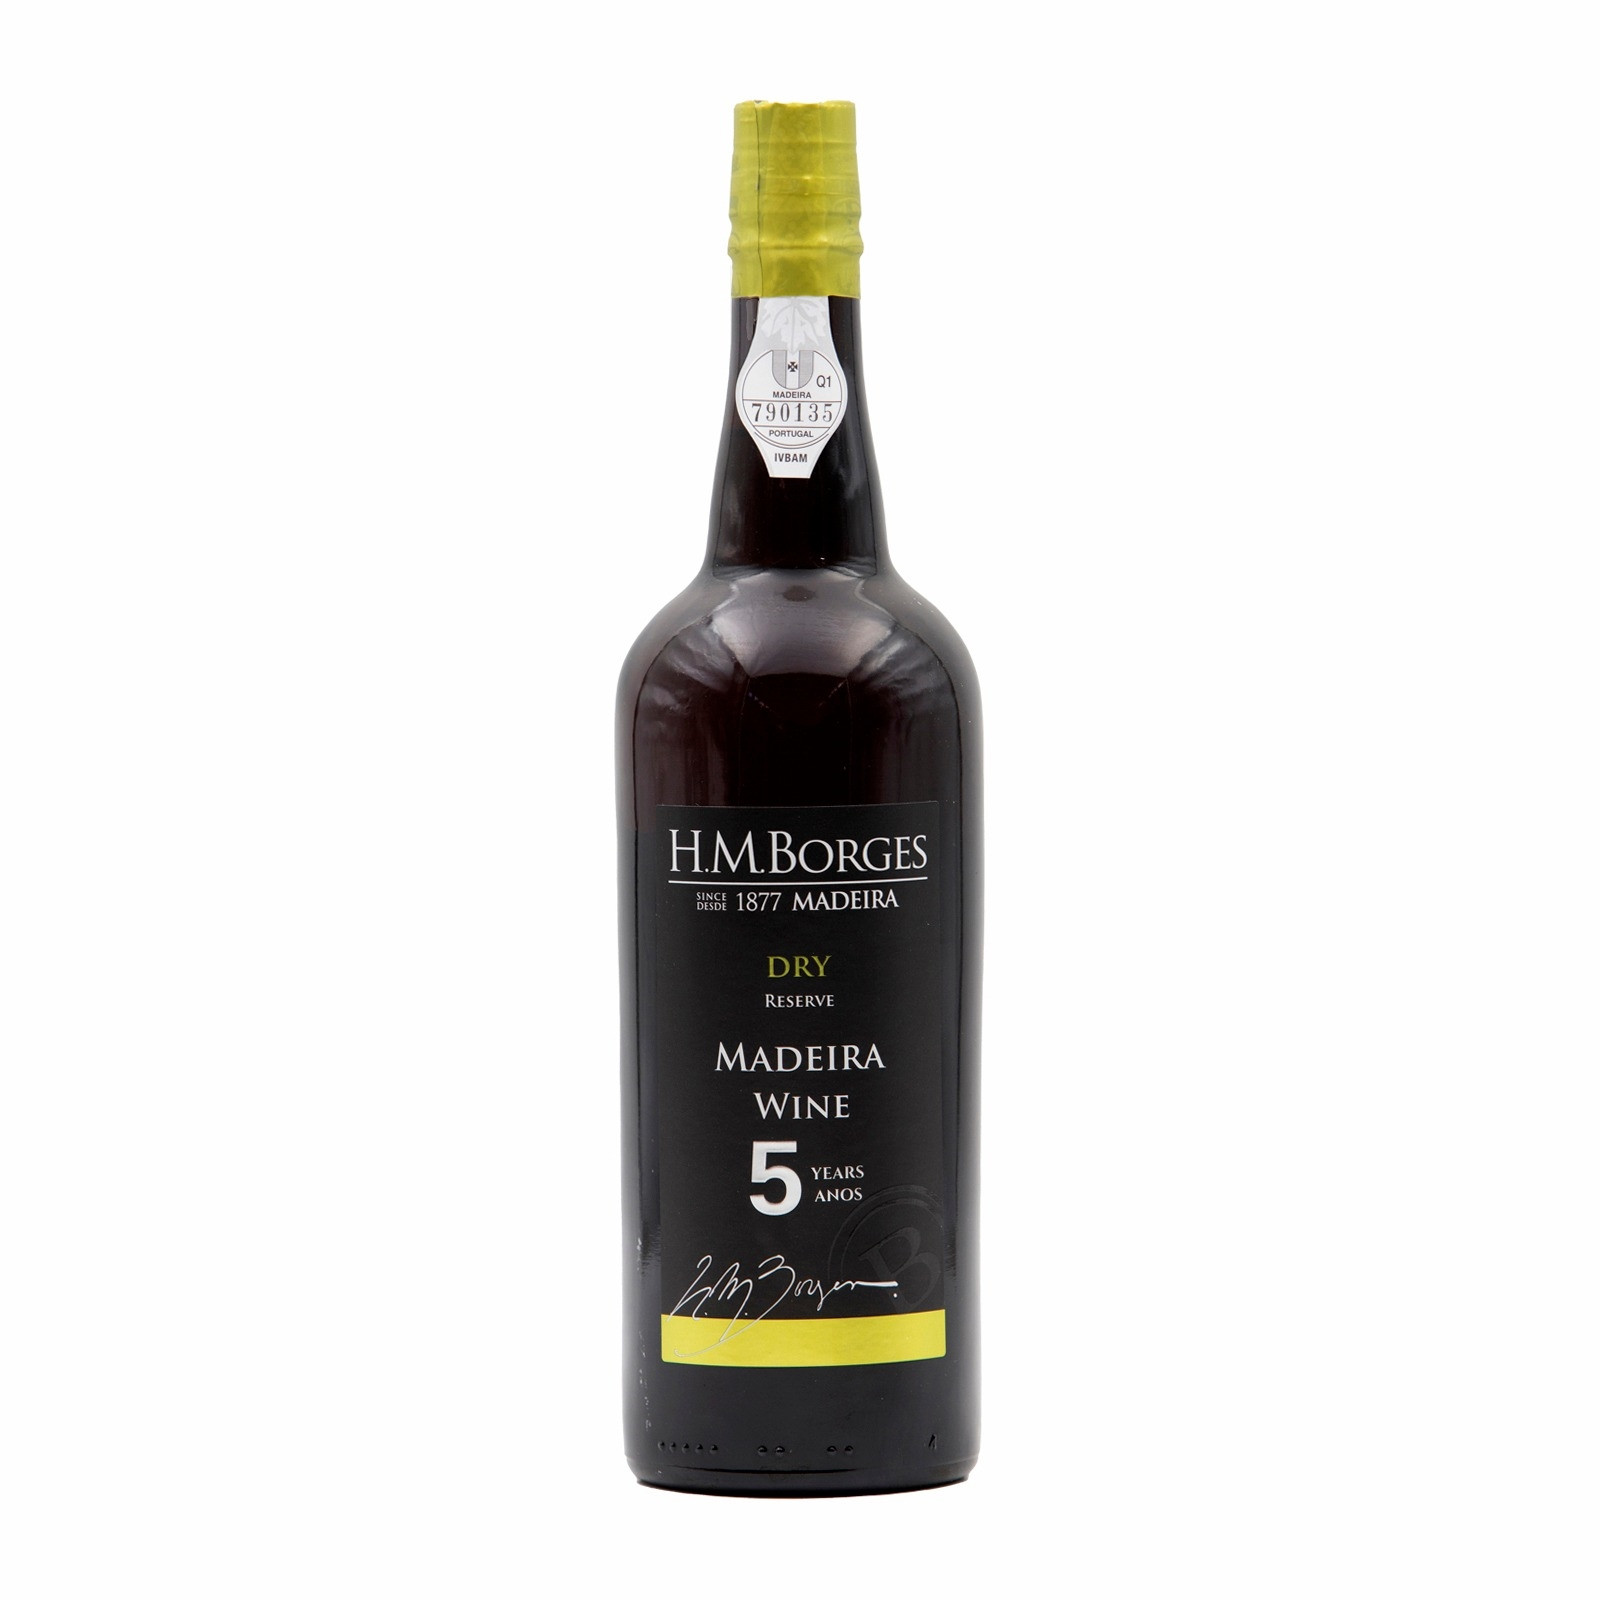 H M Borges Reserve 5 years Dry Madeira